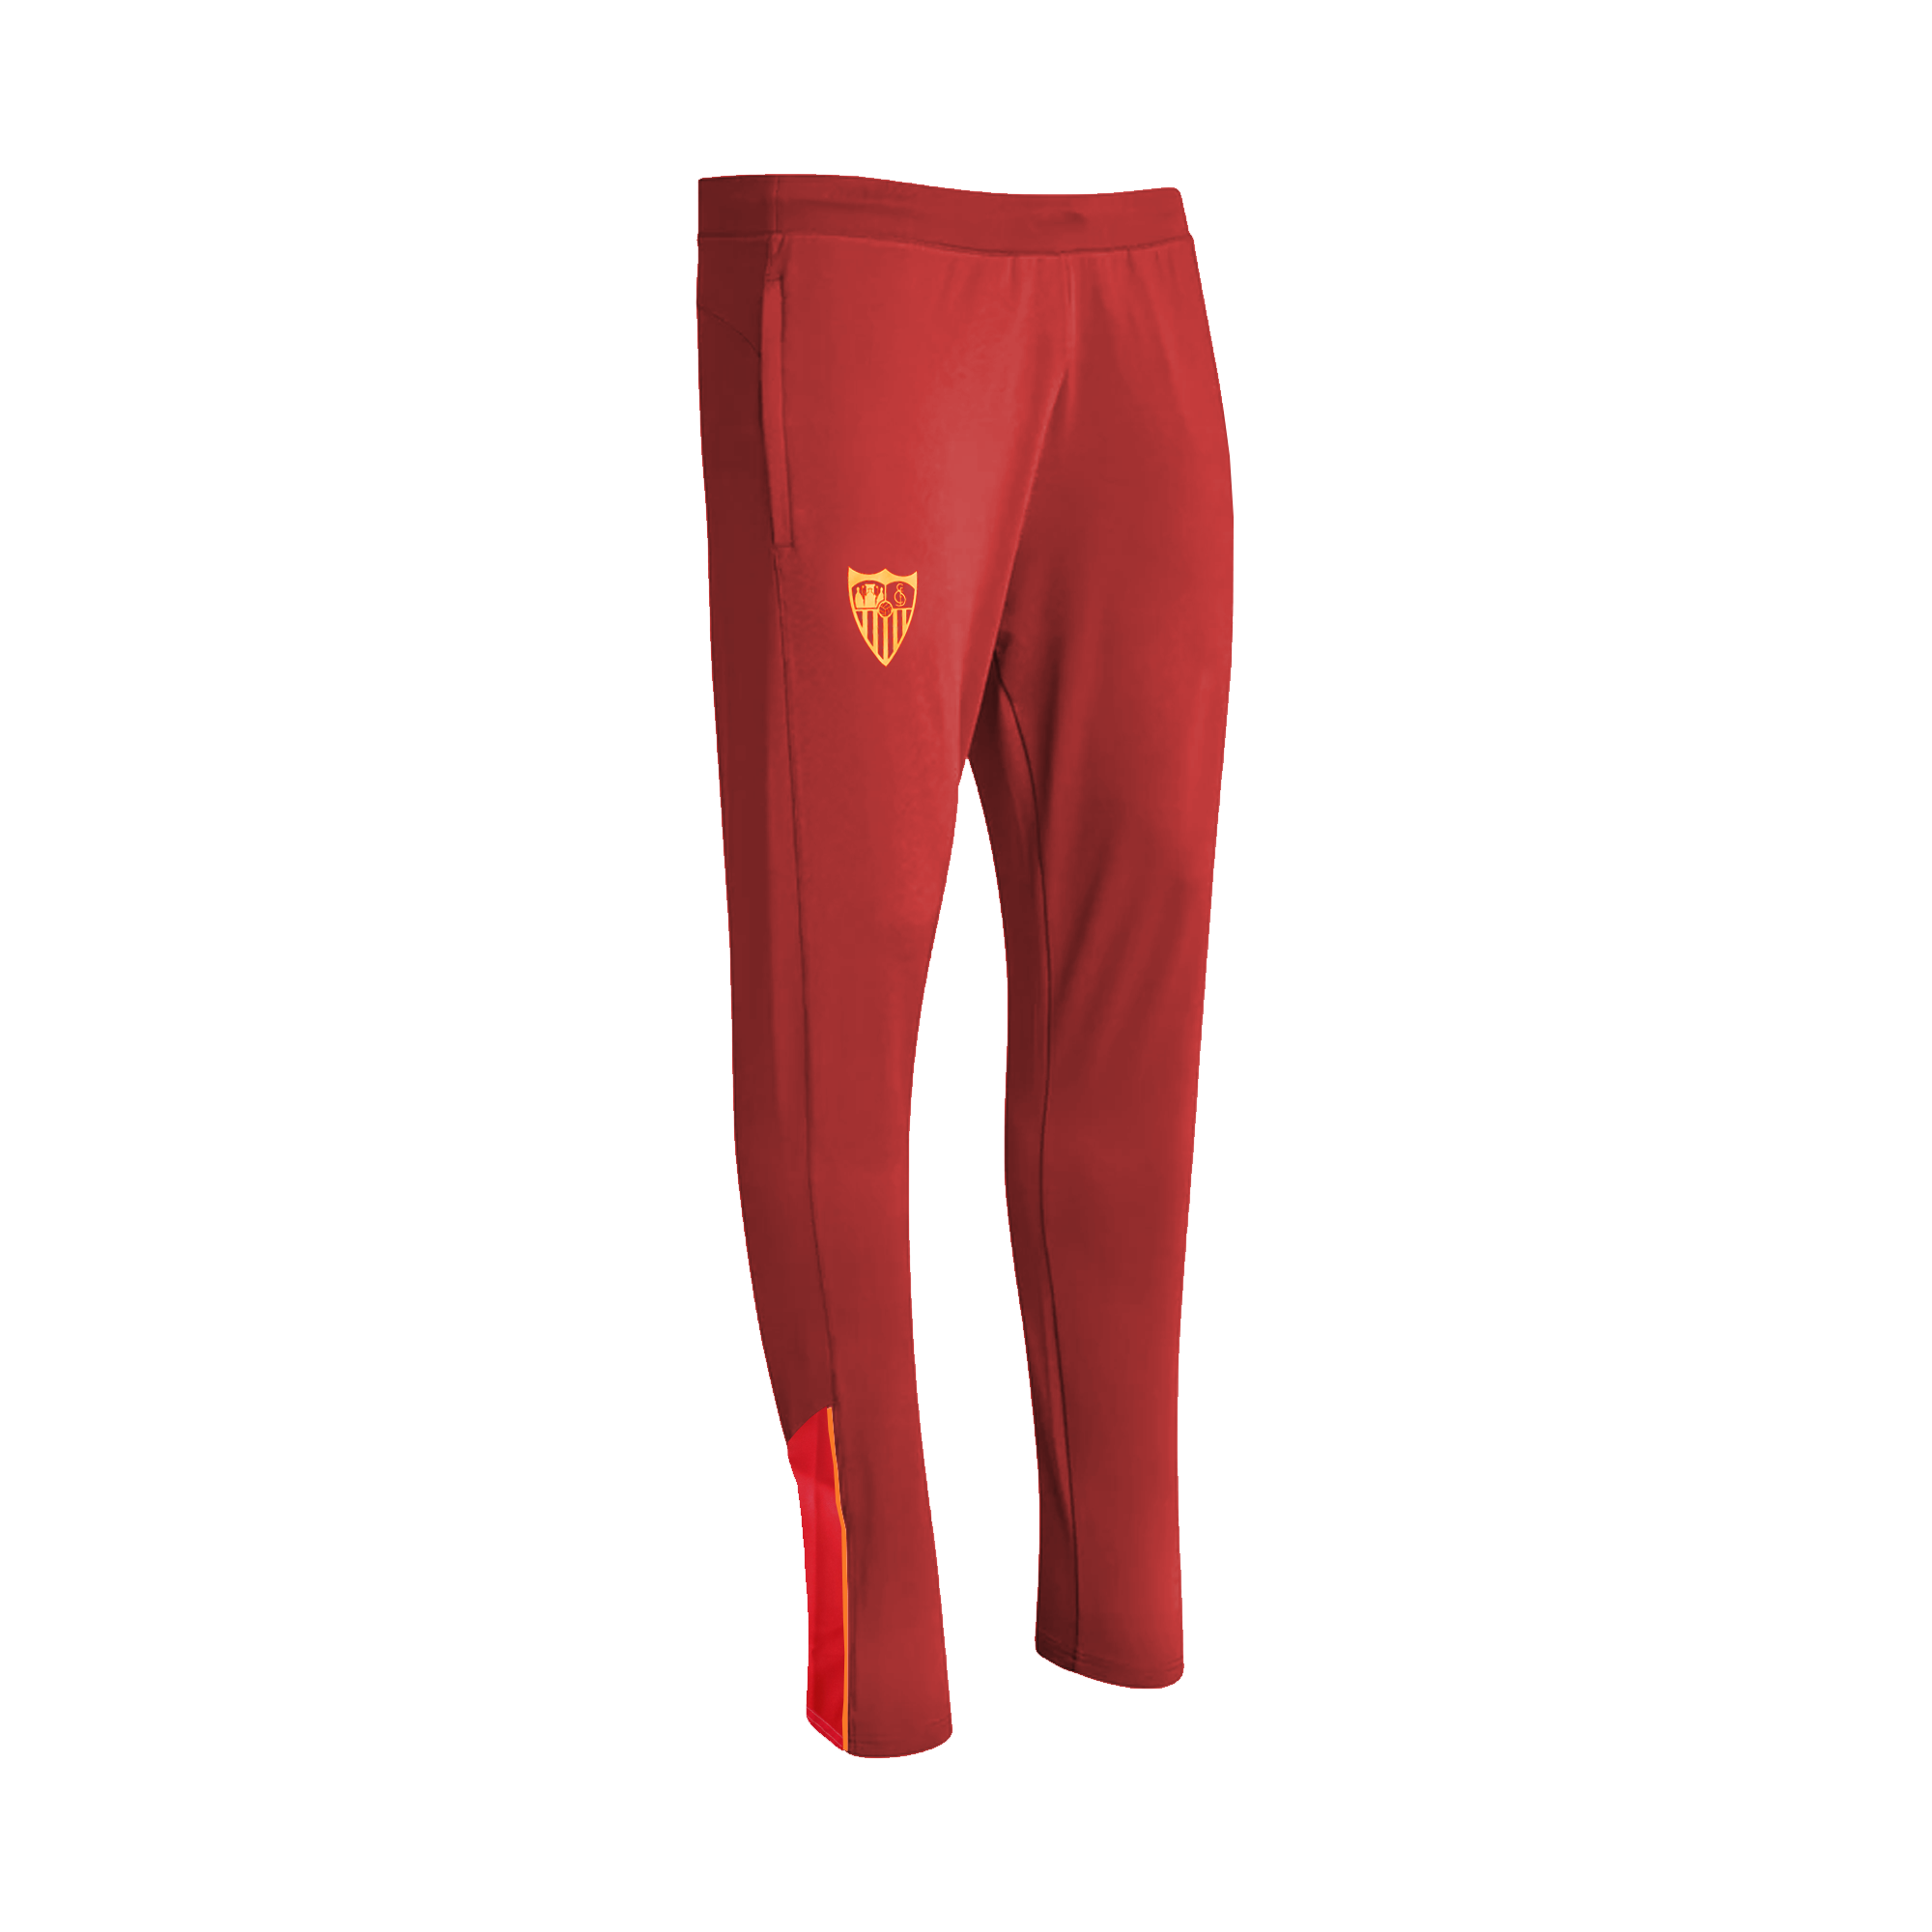 Women’s red training tracksuit bottoms 22/23